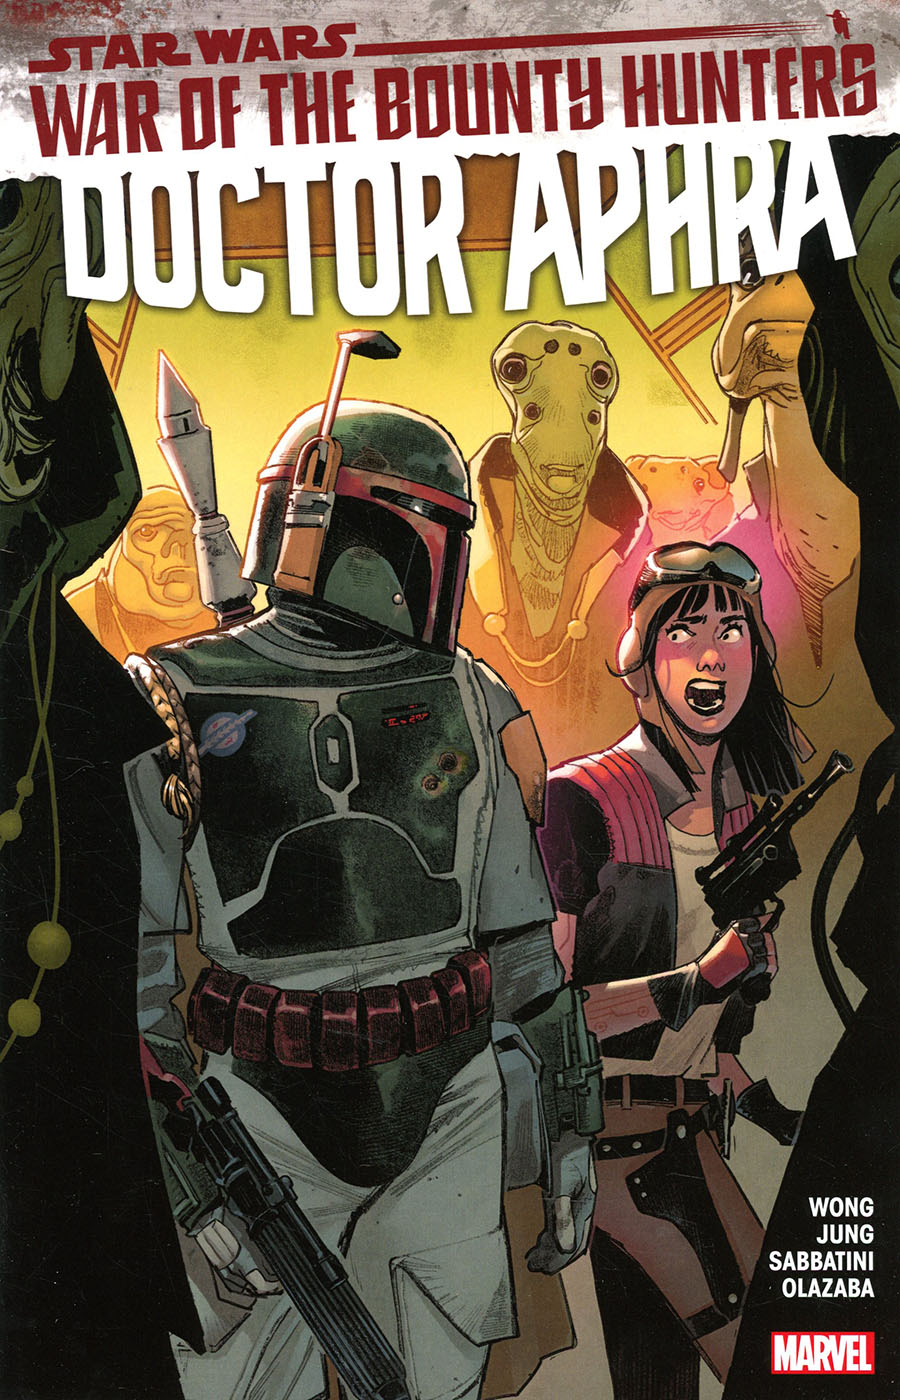 Star Wars Doctor Aphra (2020) Vol 3 War Of The Bounty Hunters TP